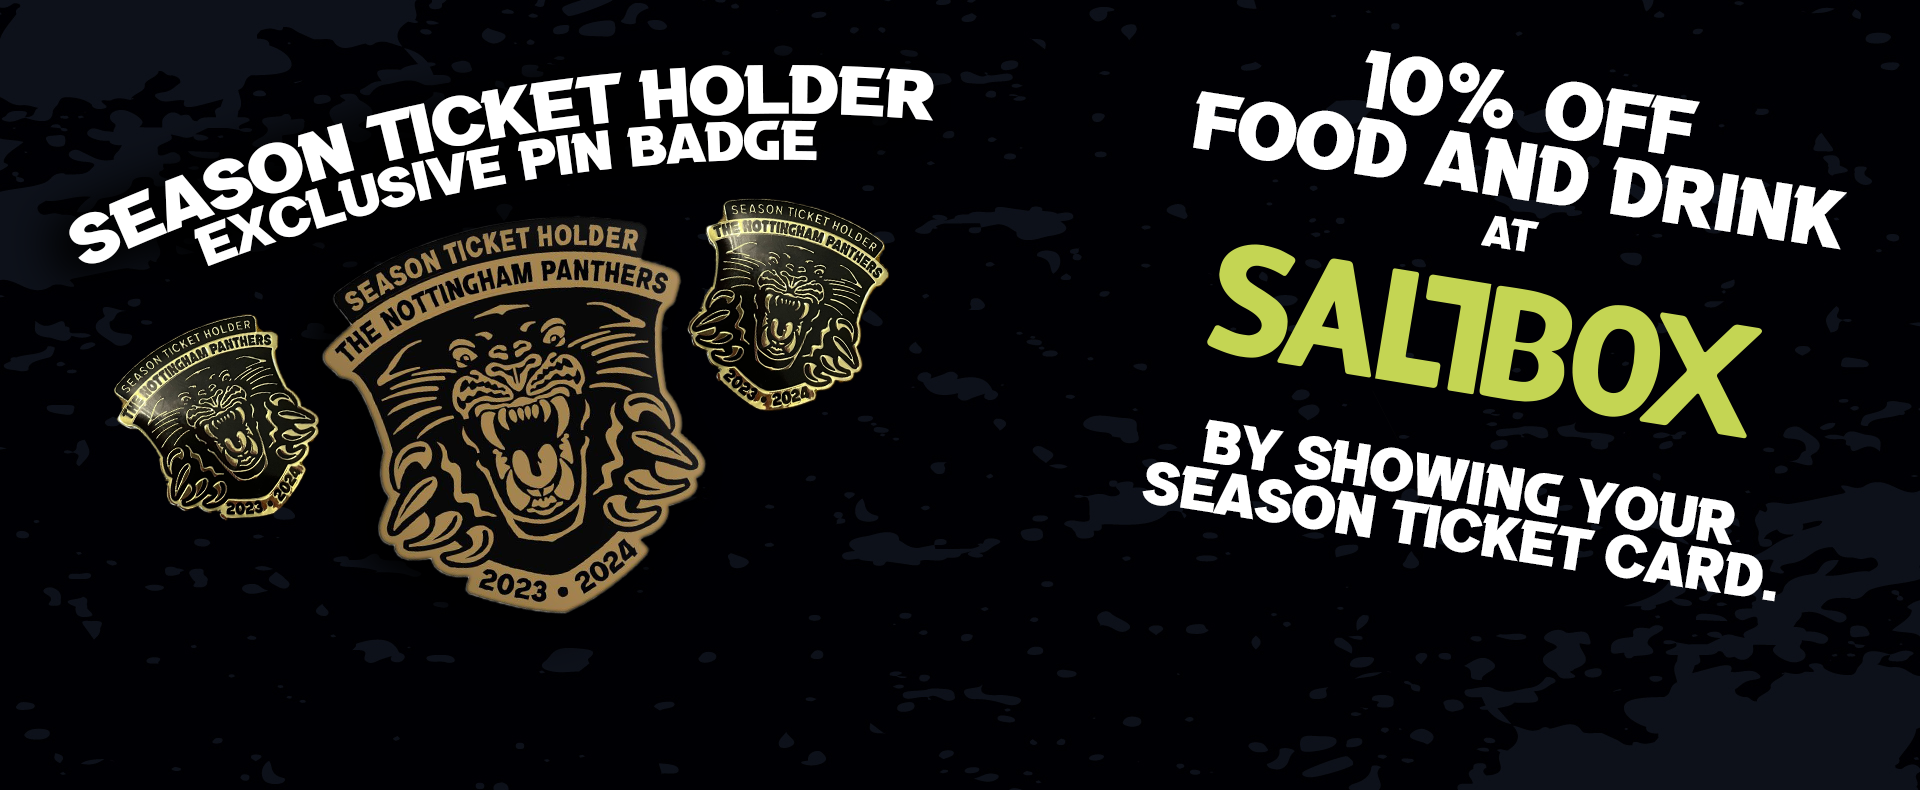 DISCOUNT AT SALTBOX AND PIN BADGE FOR SEASON TICKET HOLDERS Top Image